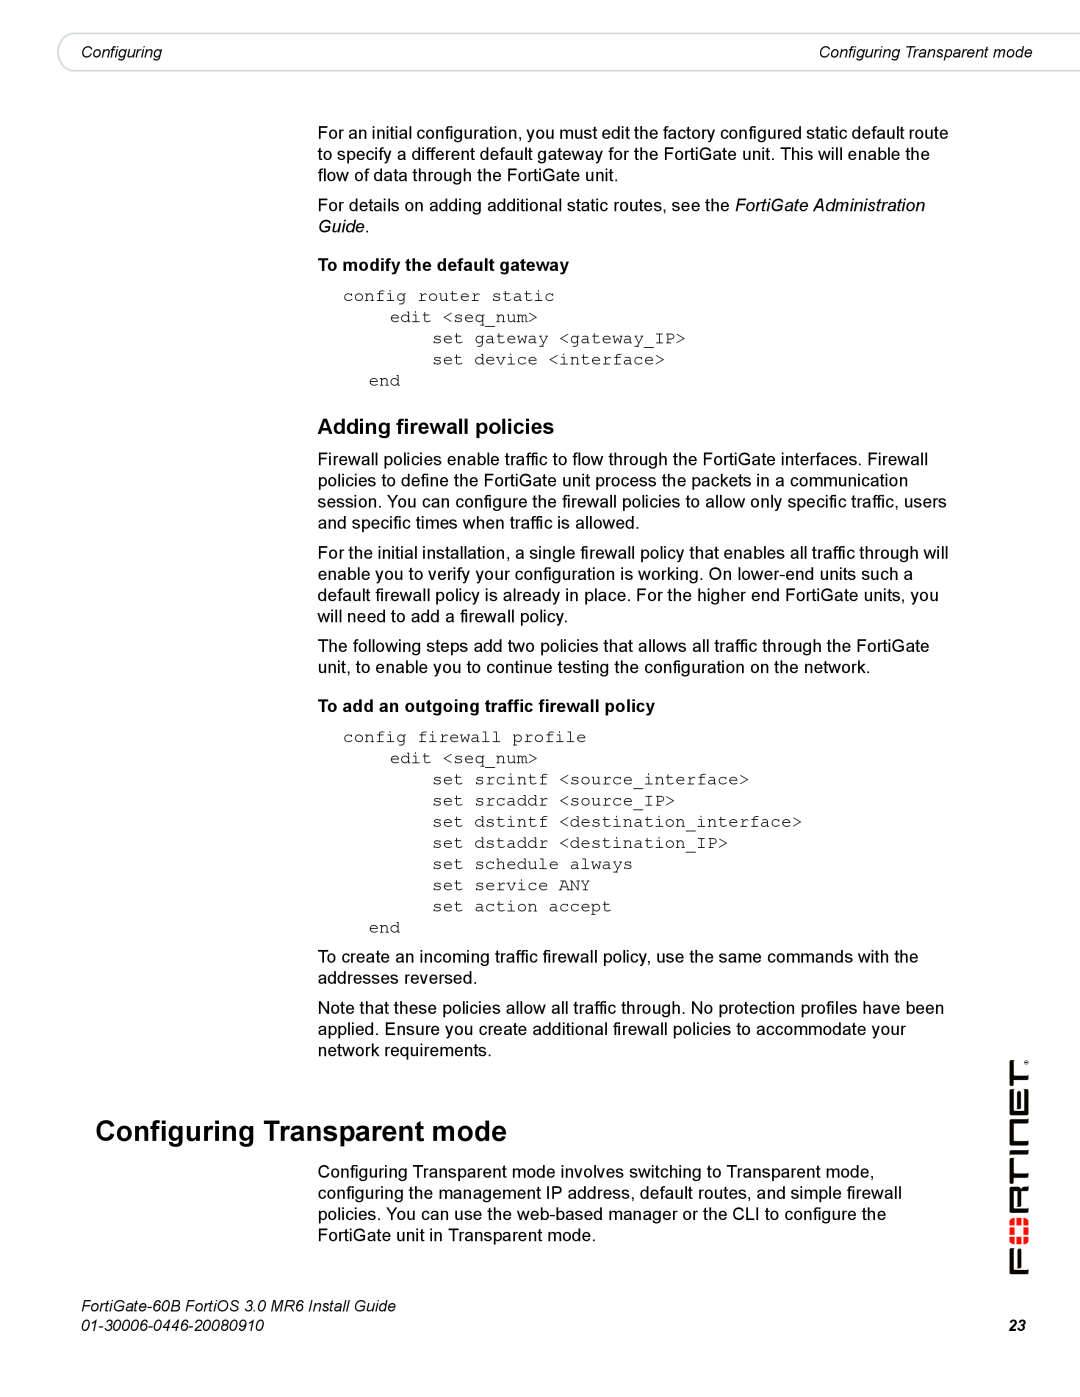 Fortinet 60B manual Configuring Transparent mode, To modify the default gateway, To add an outgoing traffic firewall policy 